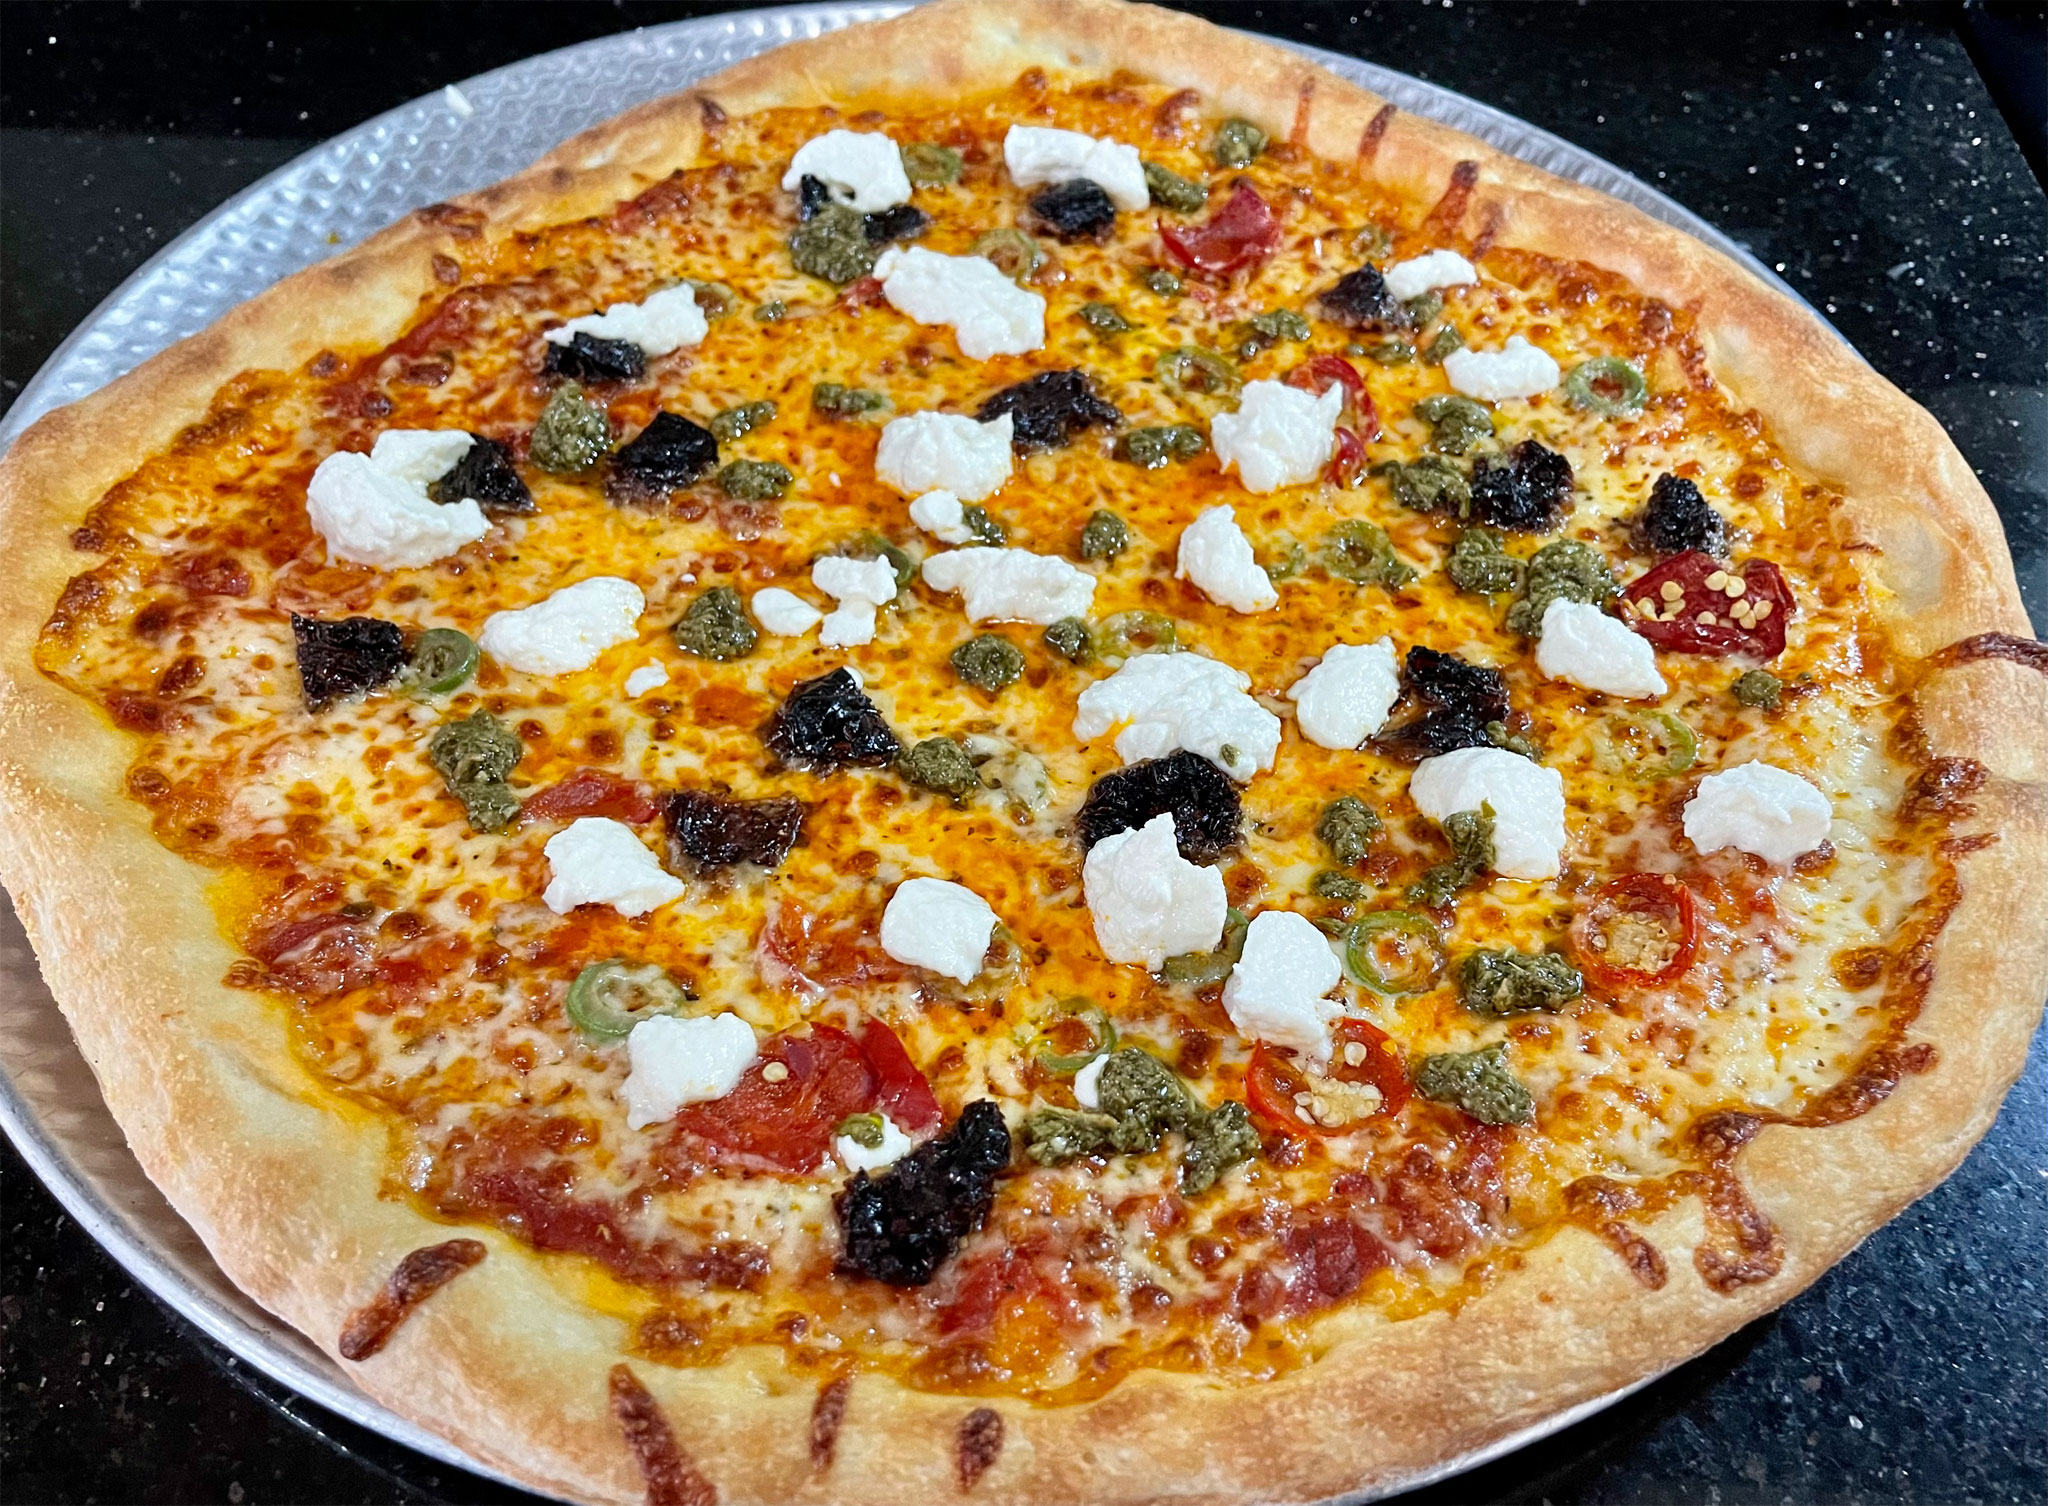 Pizza with sun dried tomatoes, cherry peppers Castelvetrano olives